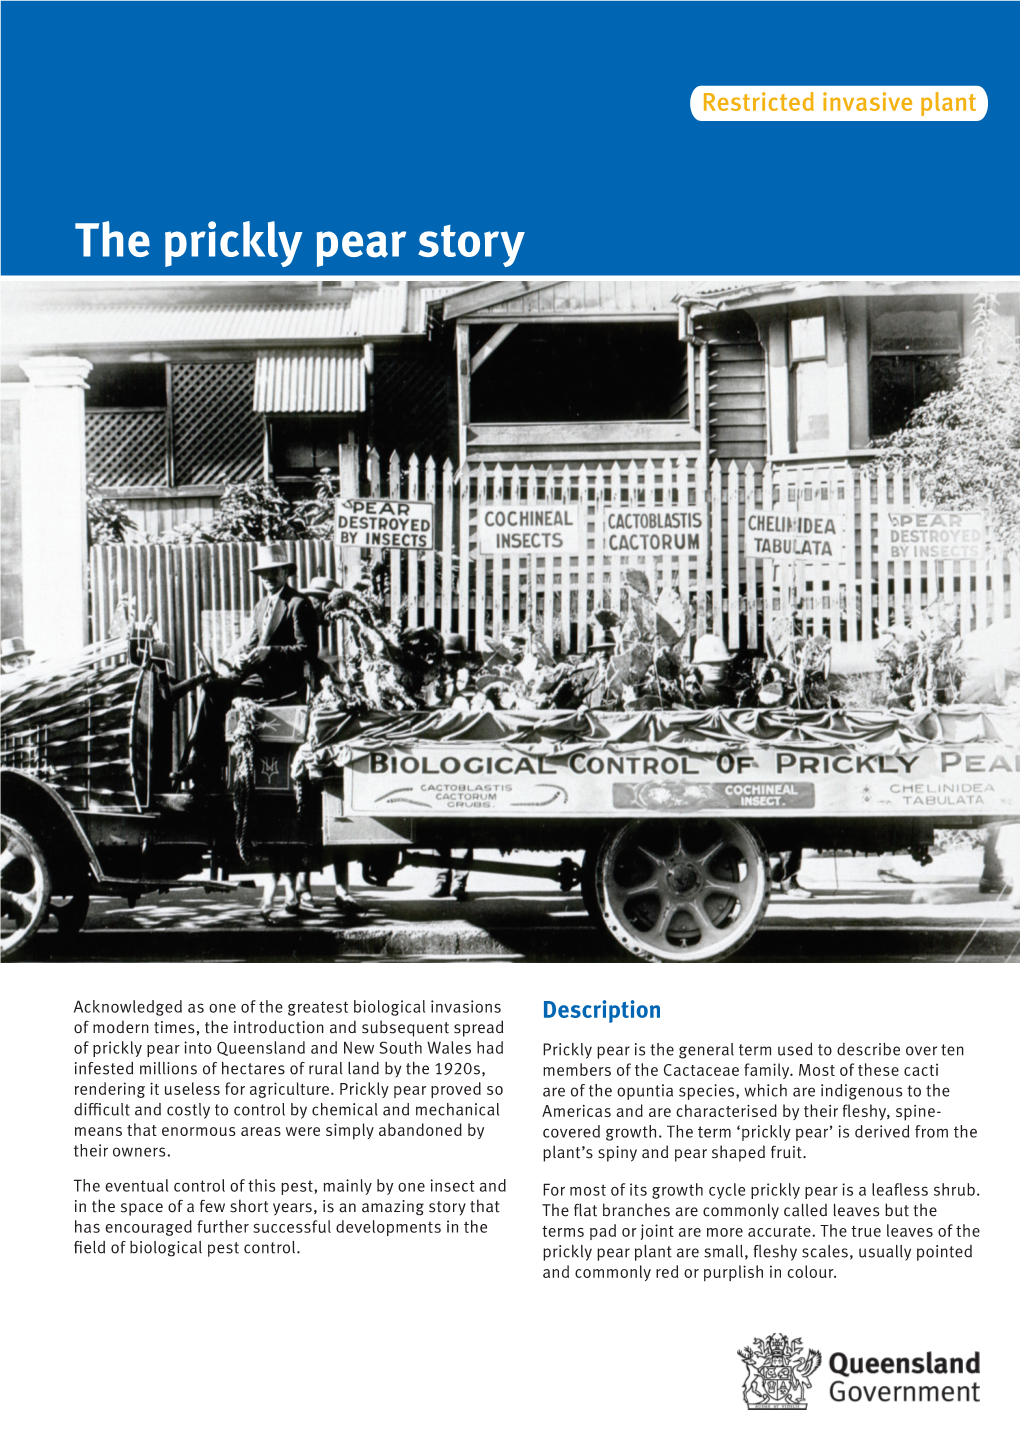 The Prickly Pear Story